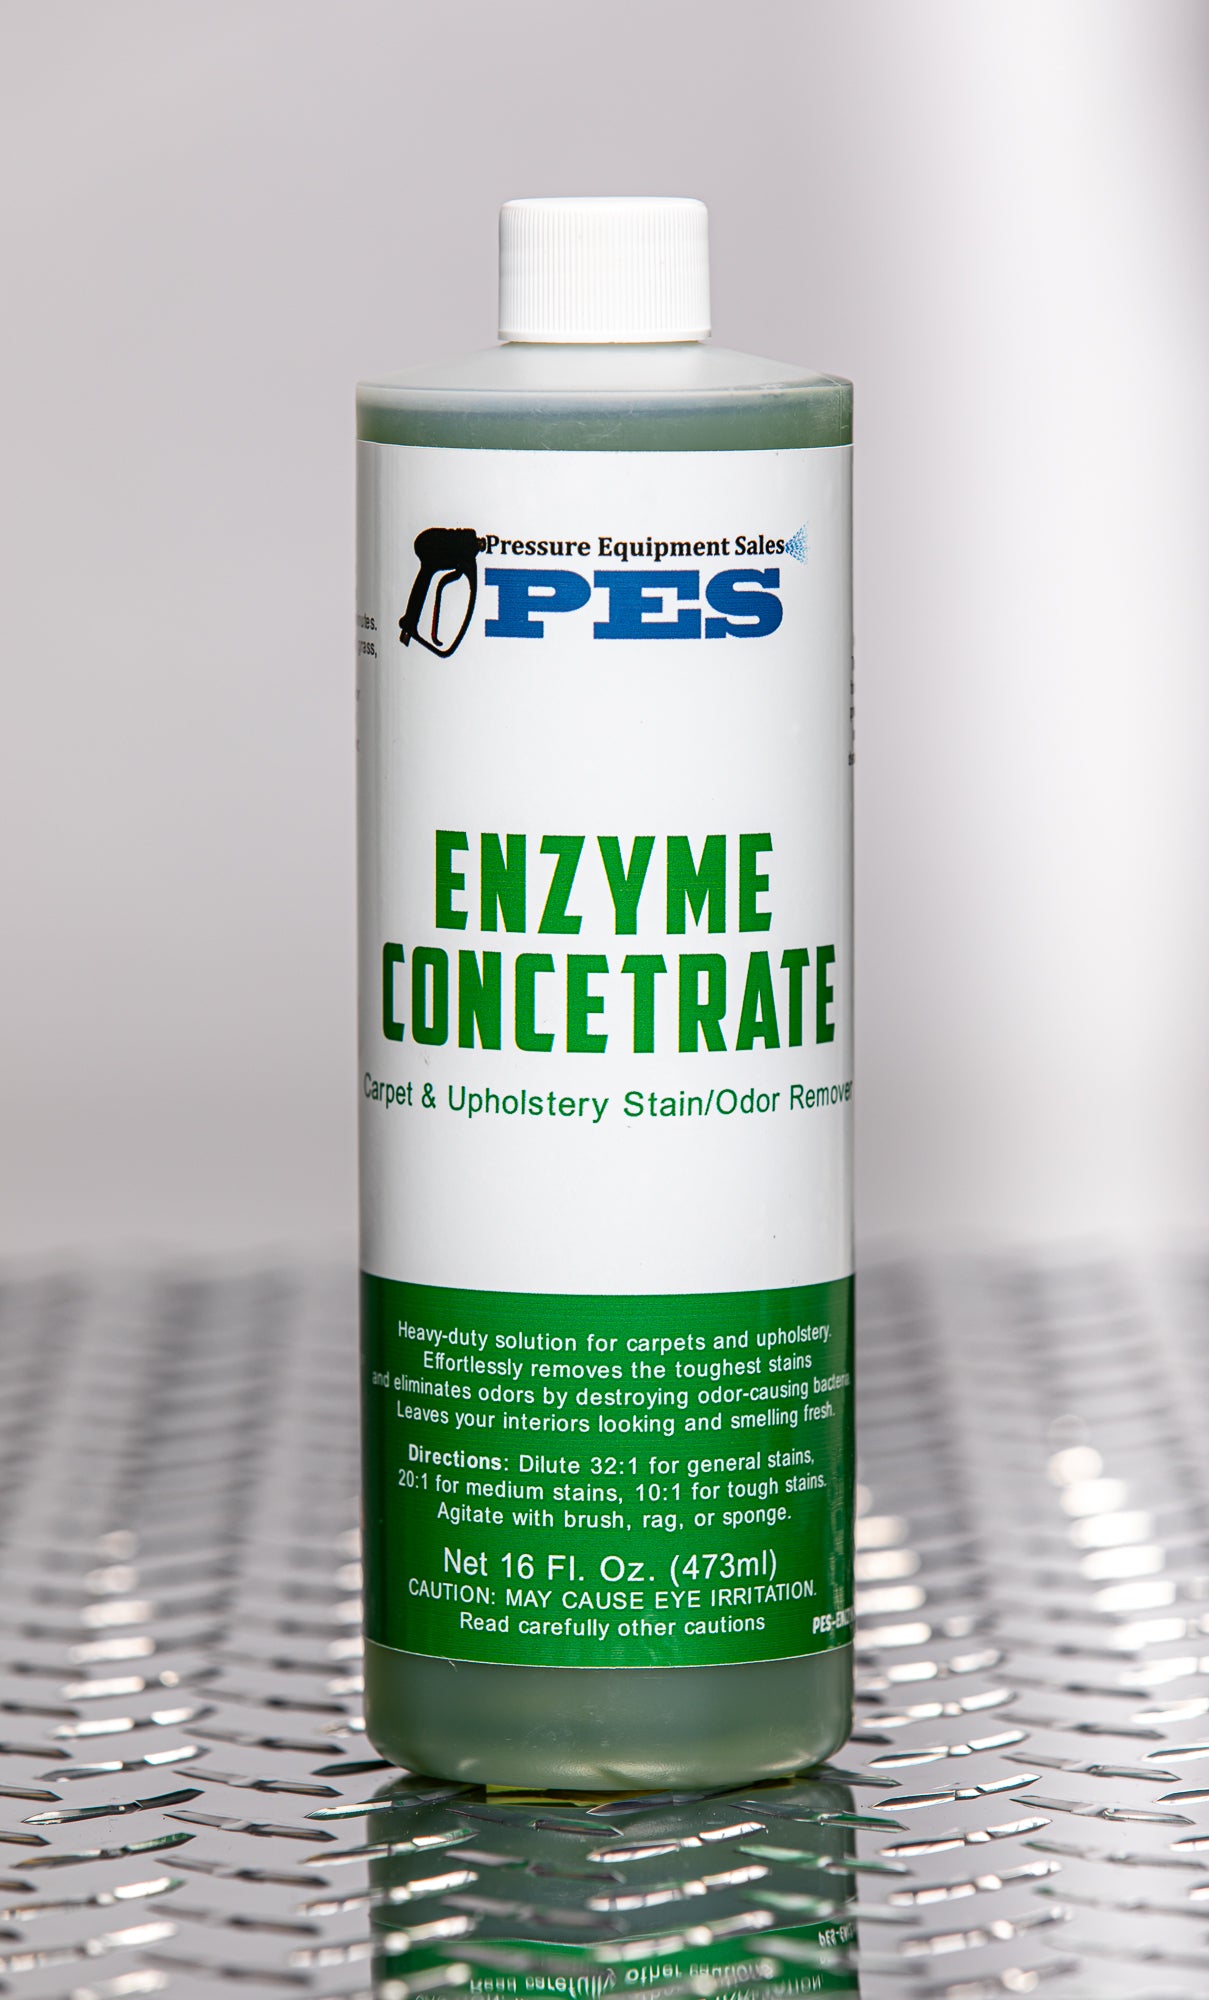 Enzyme Concentrate